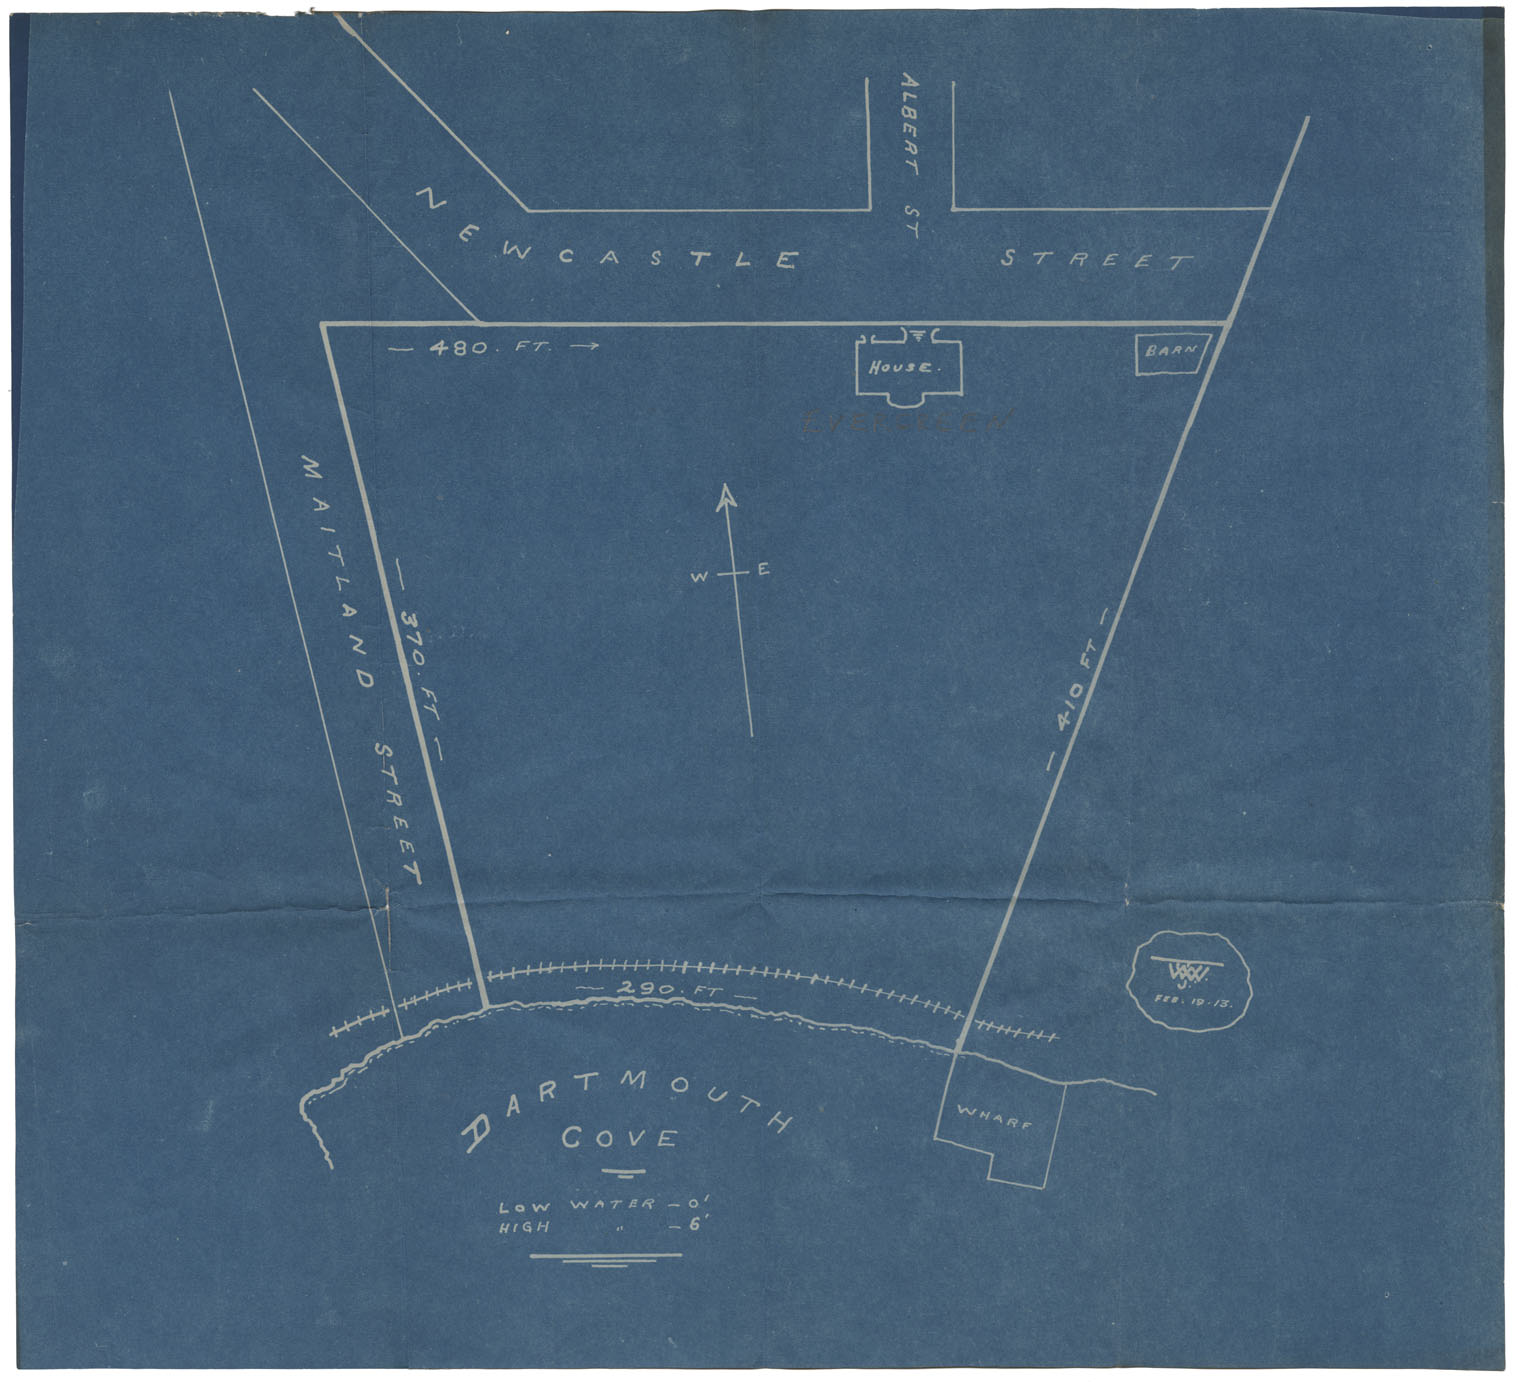 Plan of Property on Newcastle Street extending to Dartmouth Cove known as 